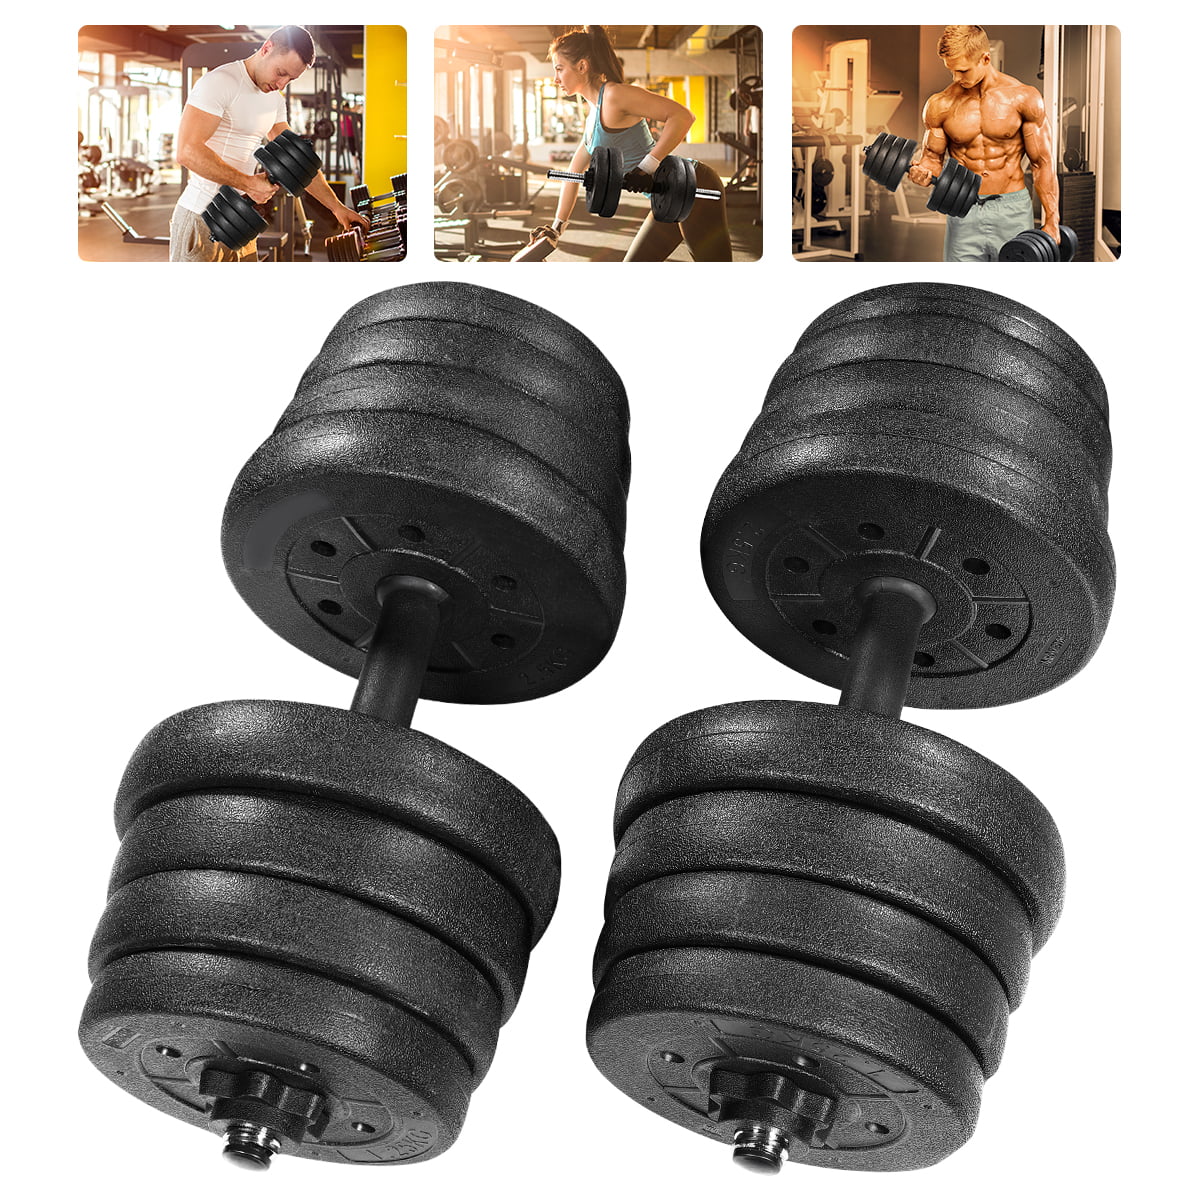 arteesol Adjustable Weight Dumbbell 10/20/30/40 KG Barbell Set 2 in 1 Fitness Home Gym Equipment 